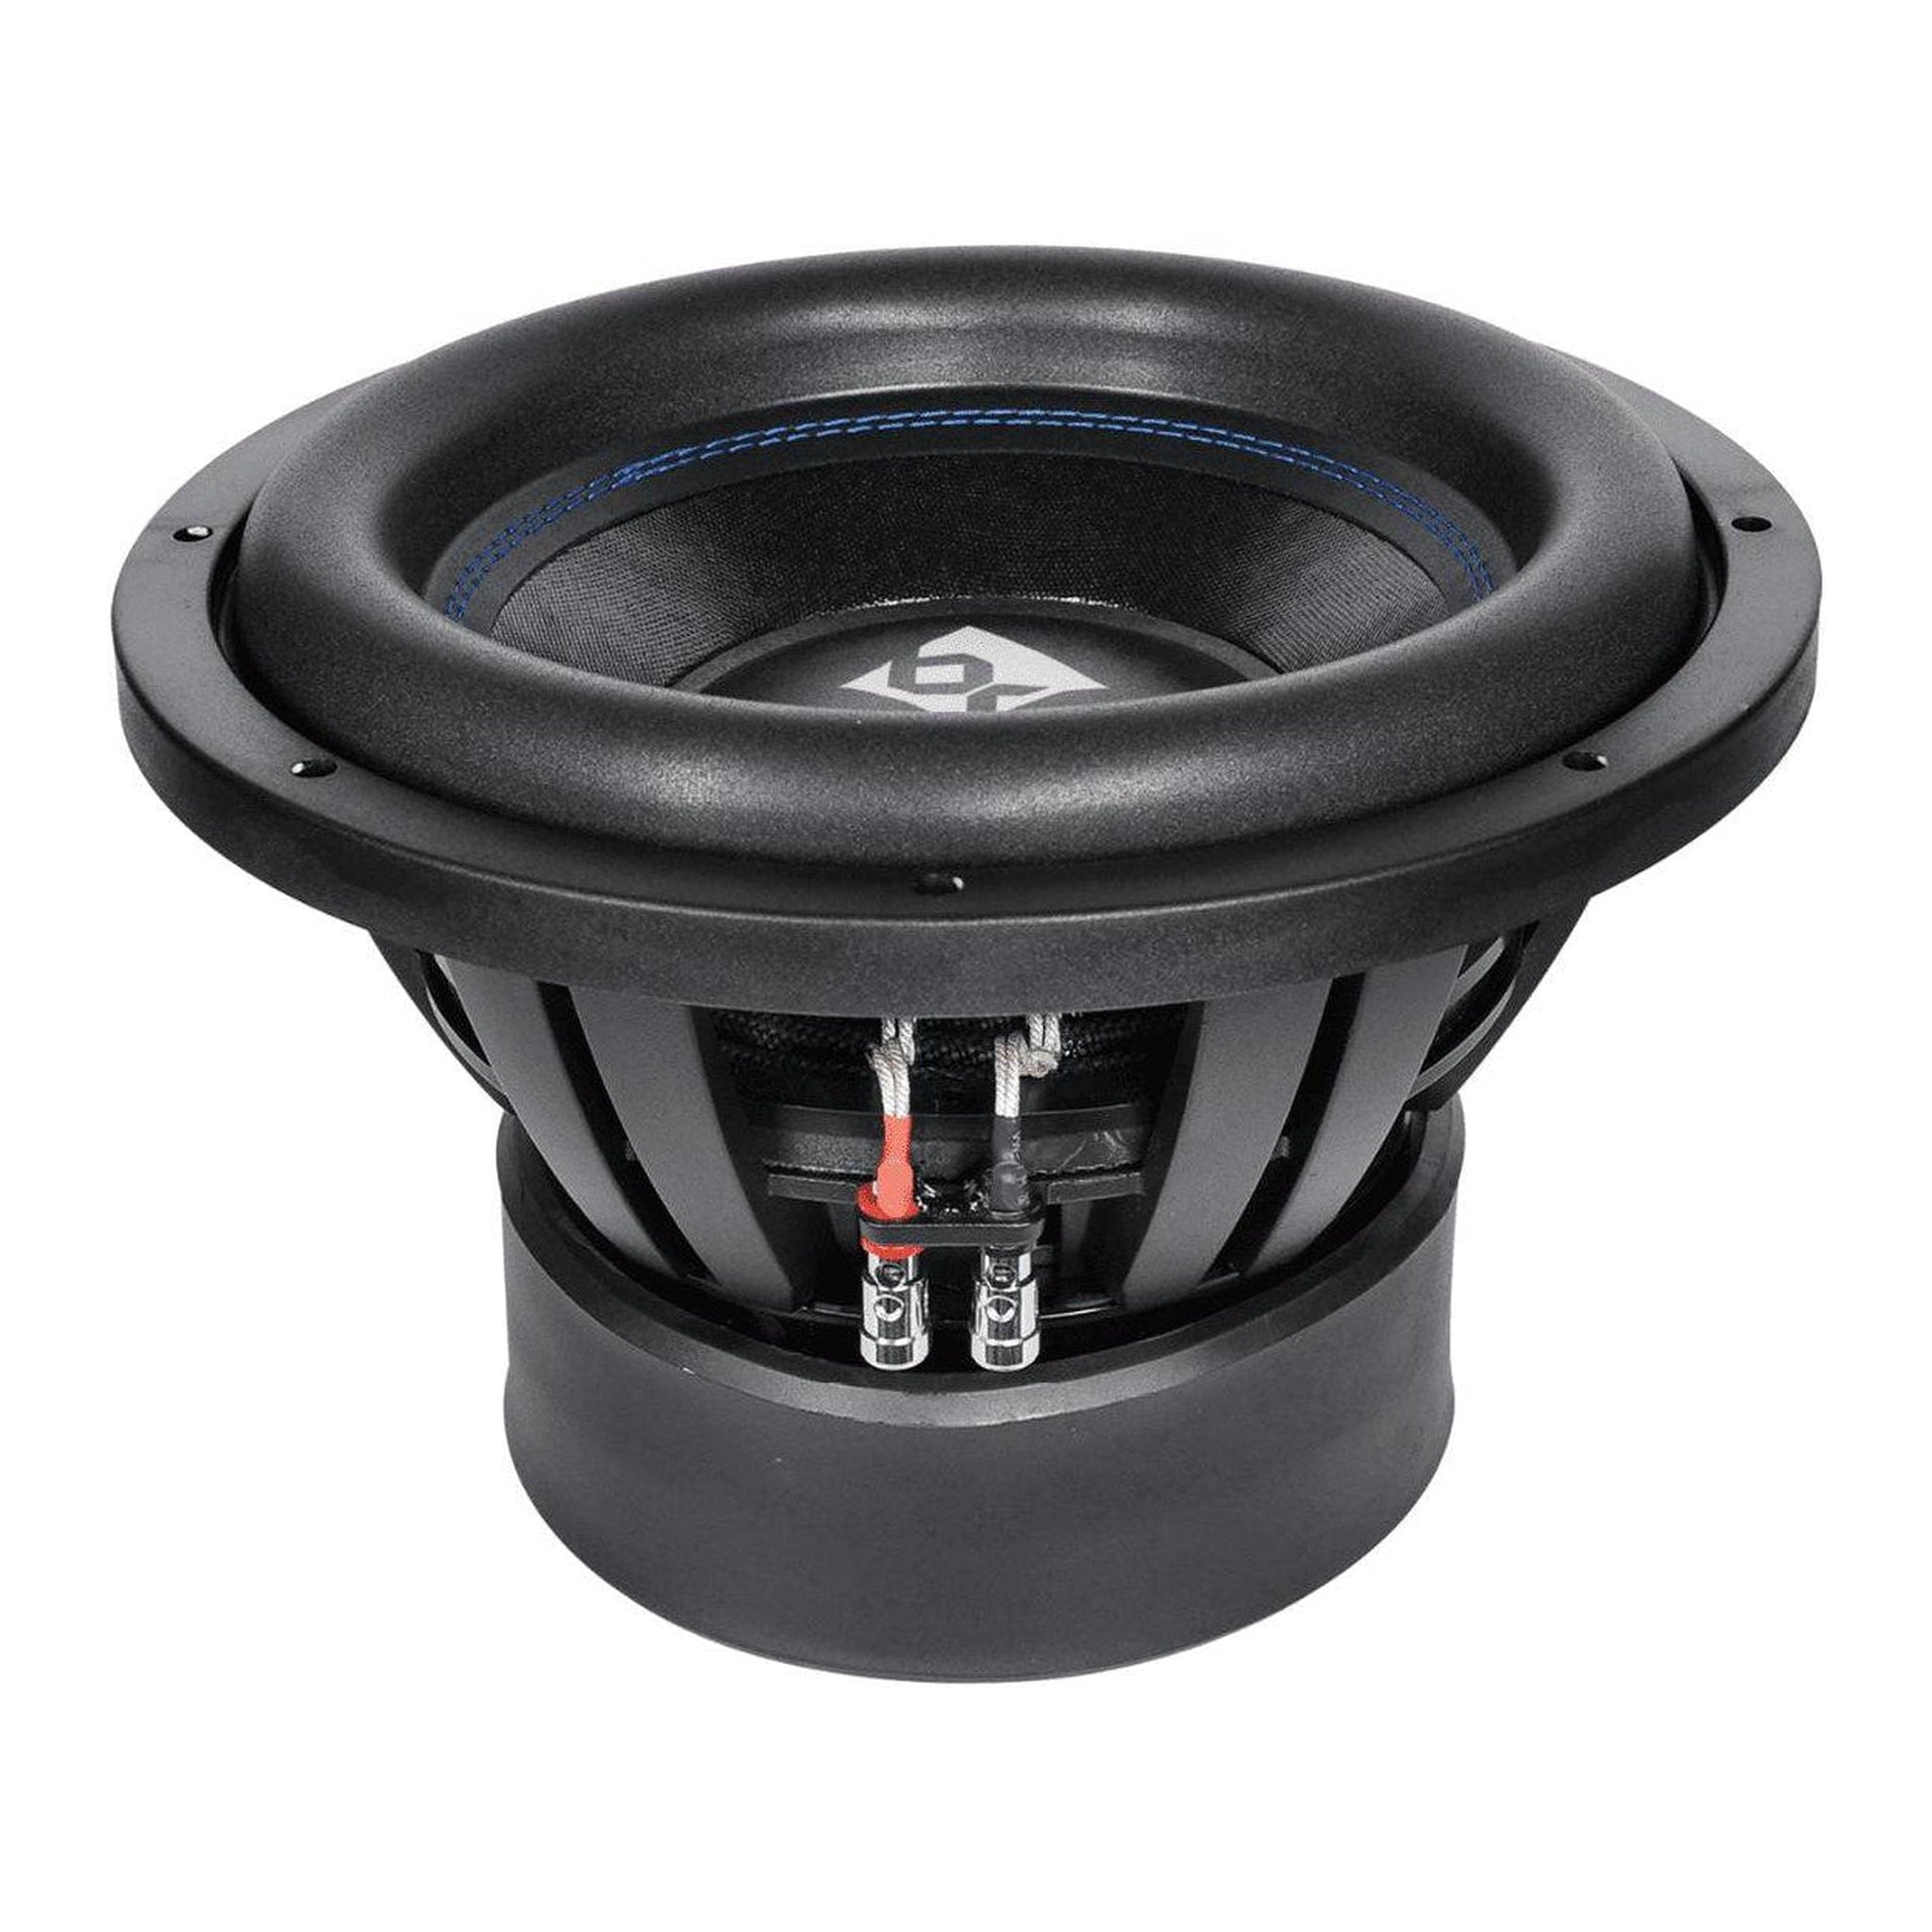 BRNK12v2 12” Competition Subwoofer 4000 Watts (4-ohms)-Bass Rockers-2